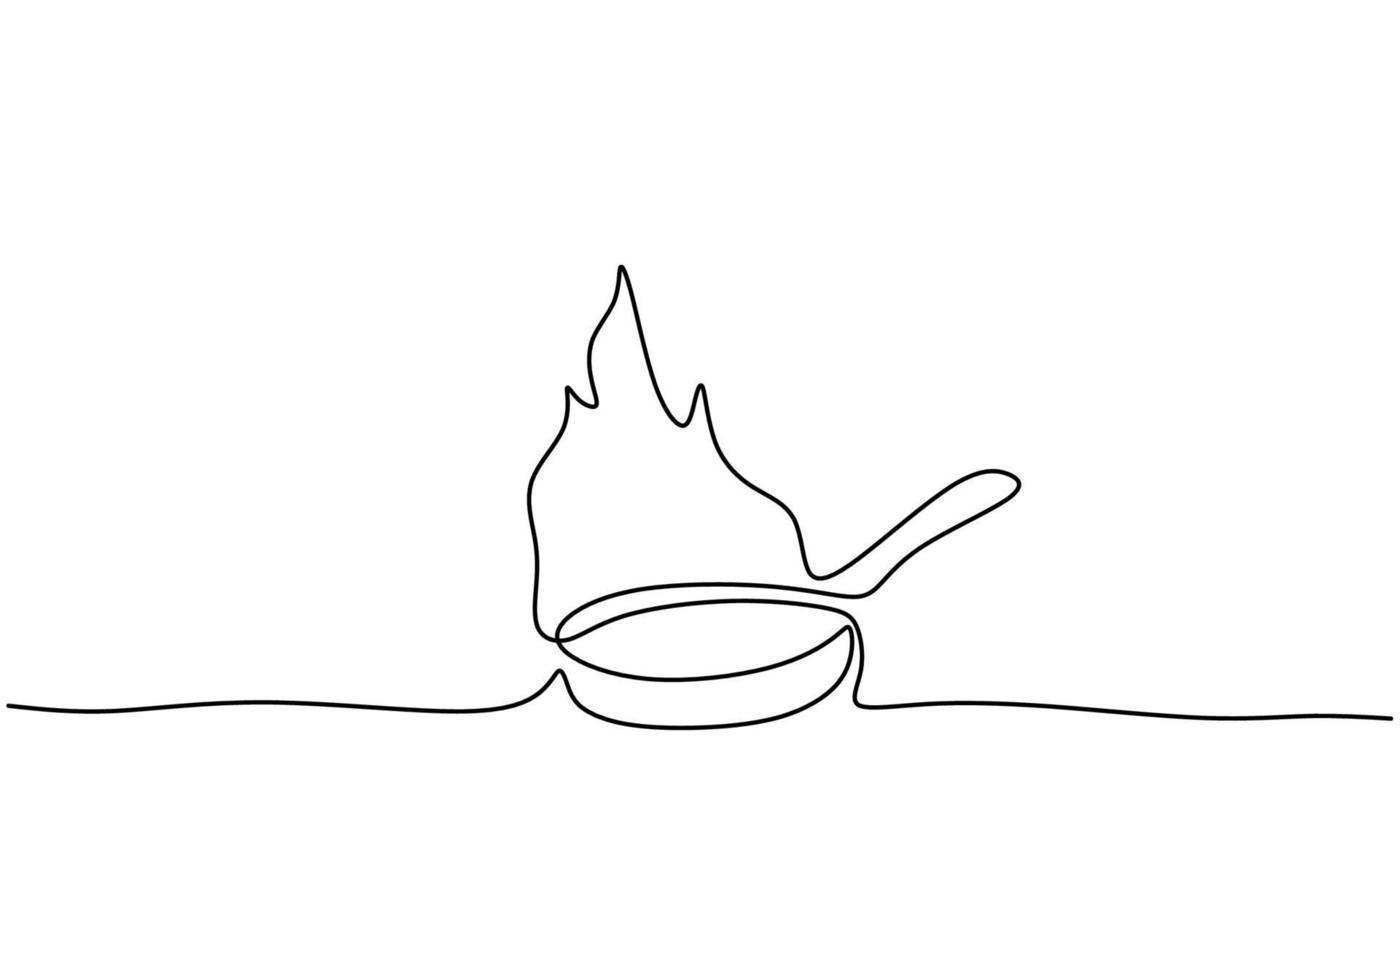 Continuous one single line of burning pan vector